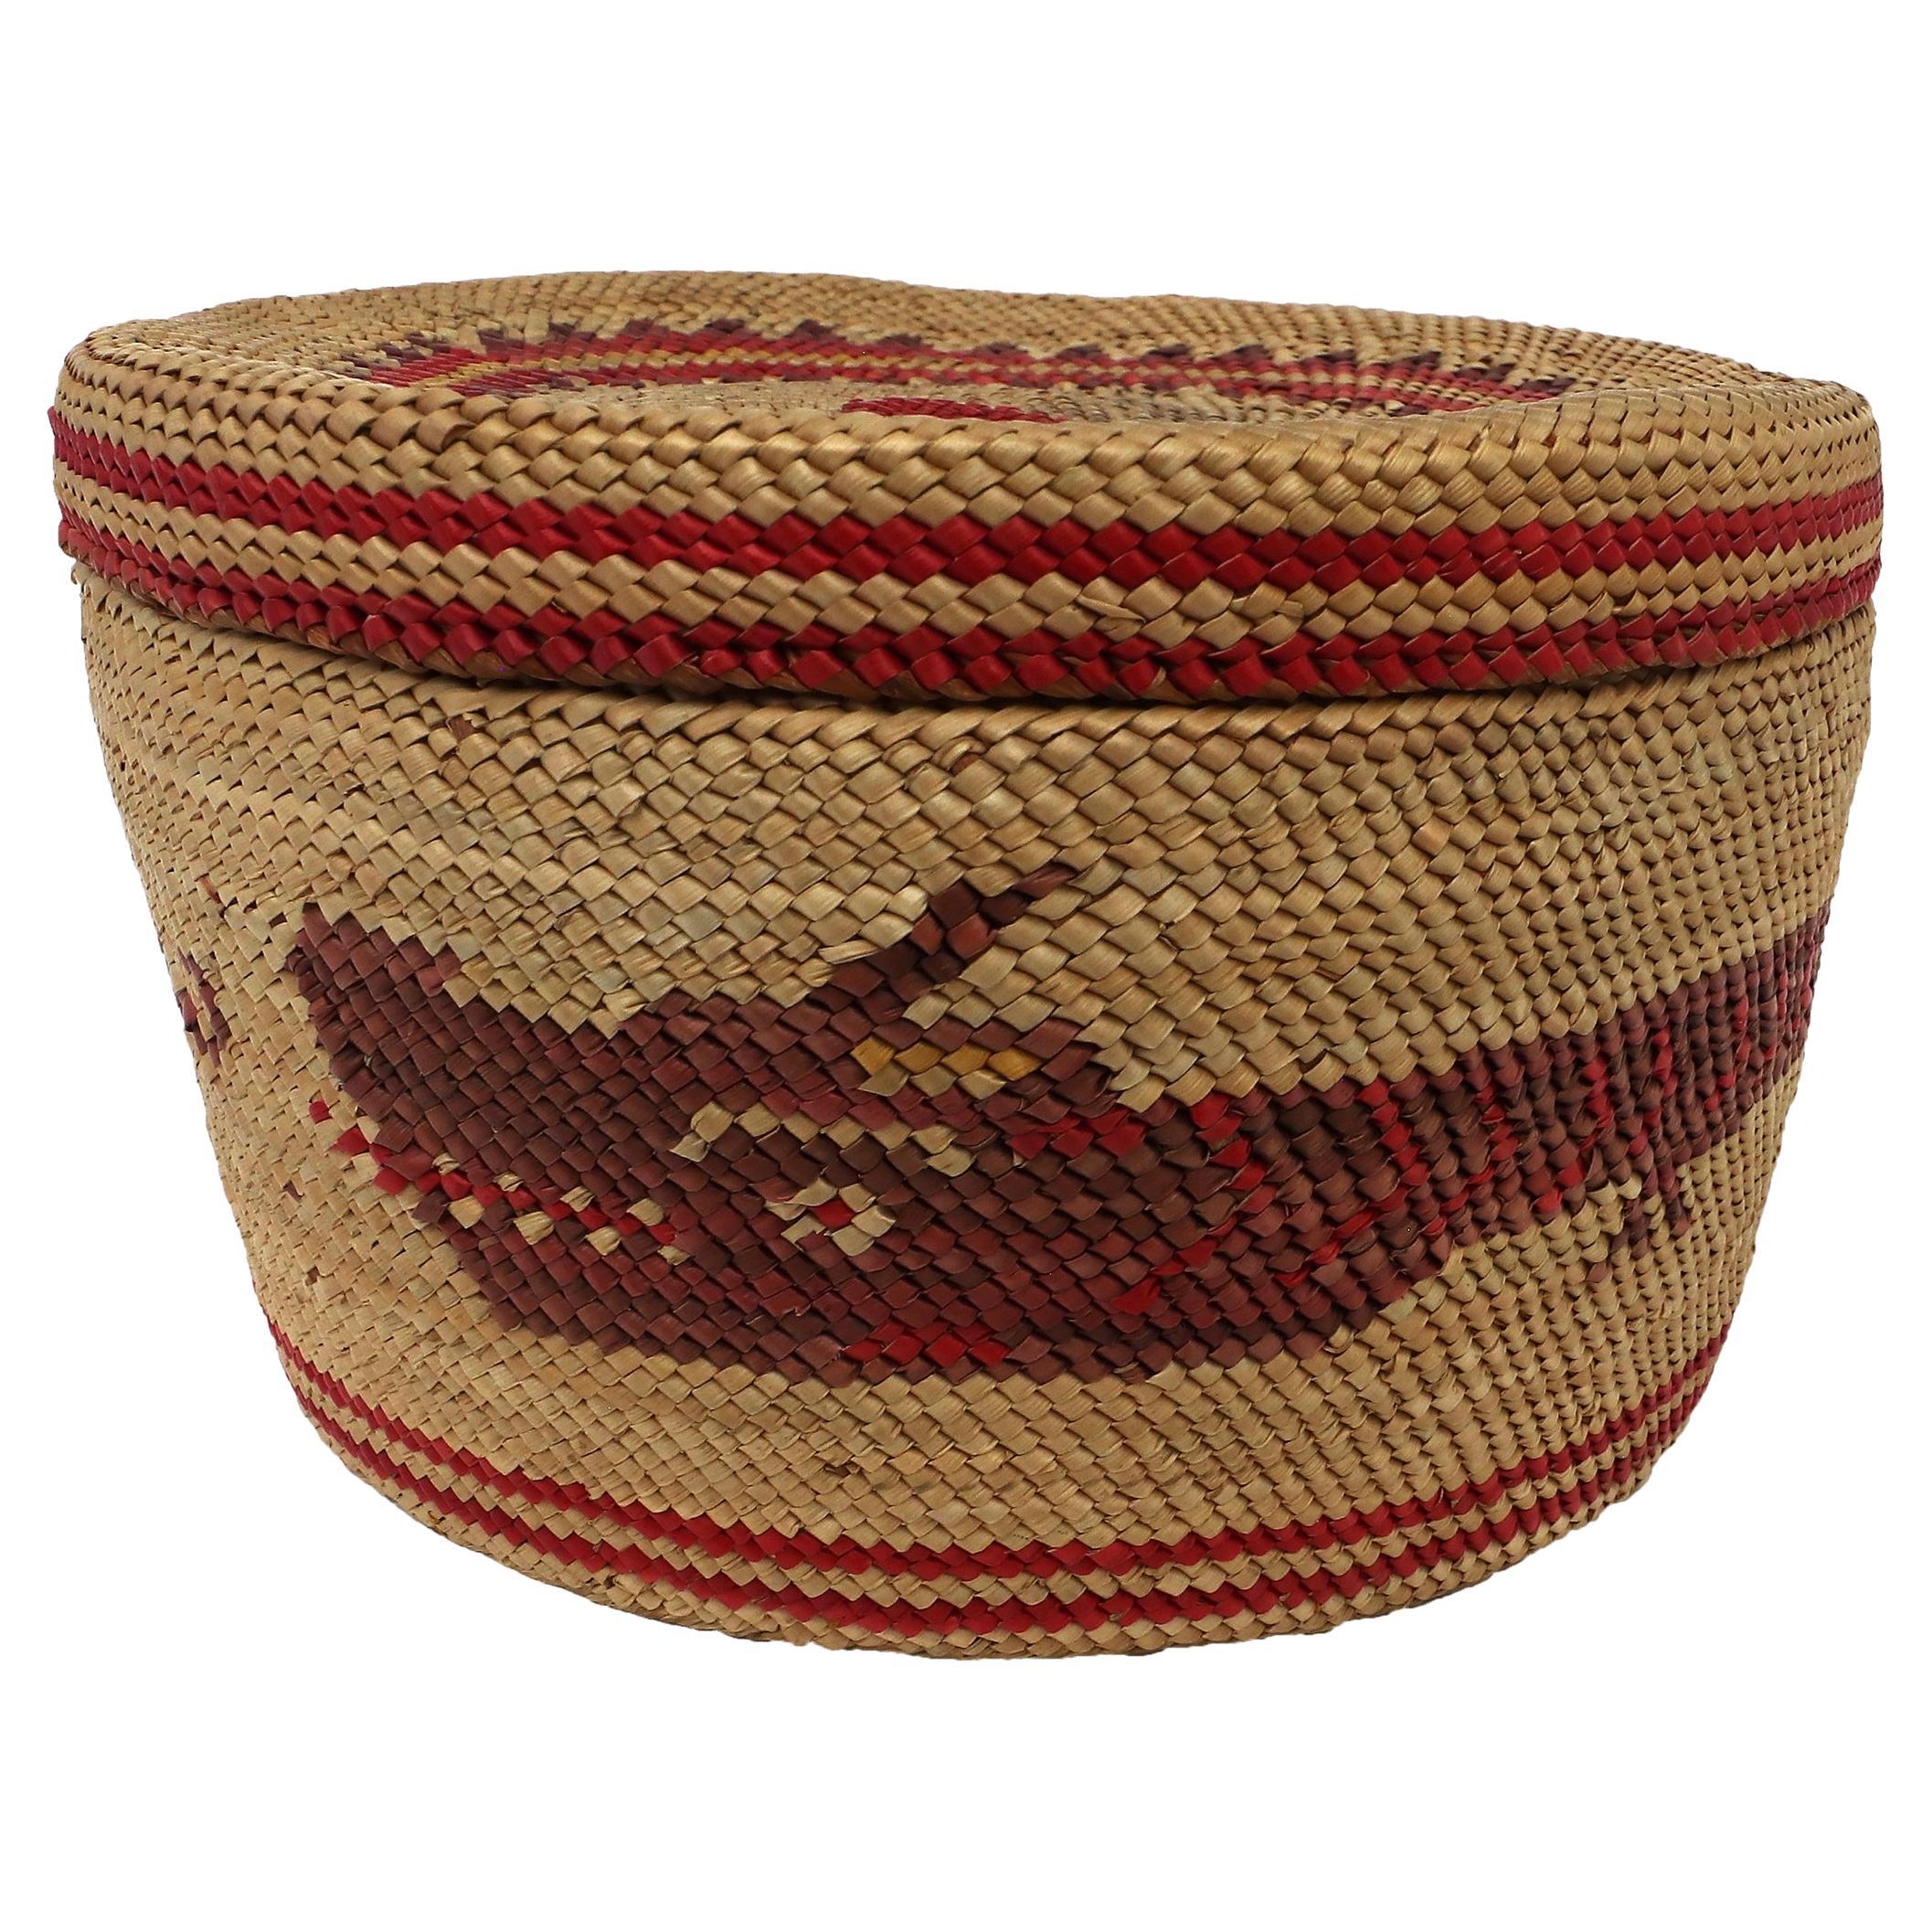 Nootka Northwest Coast 1900 Woven Basket with Top, Red and Black Designs